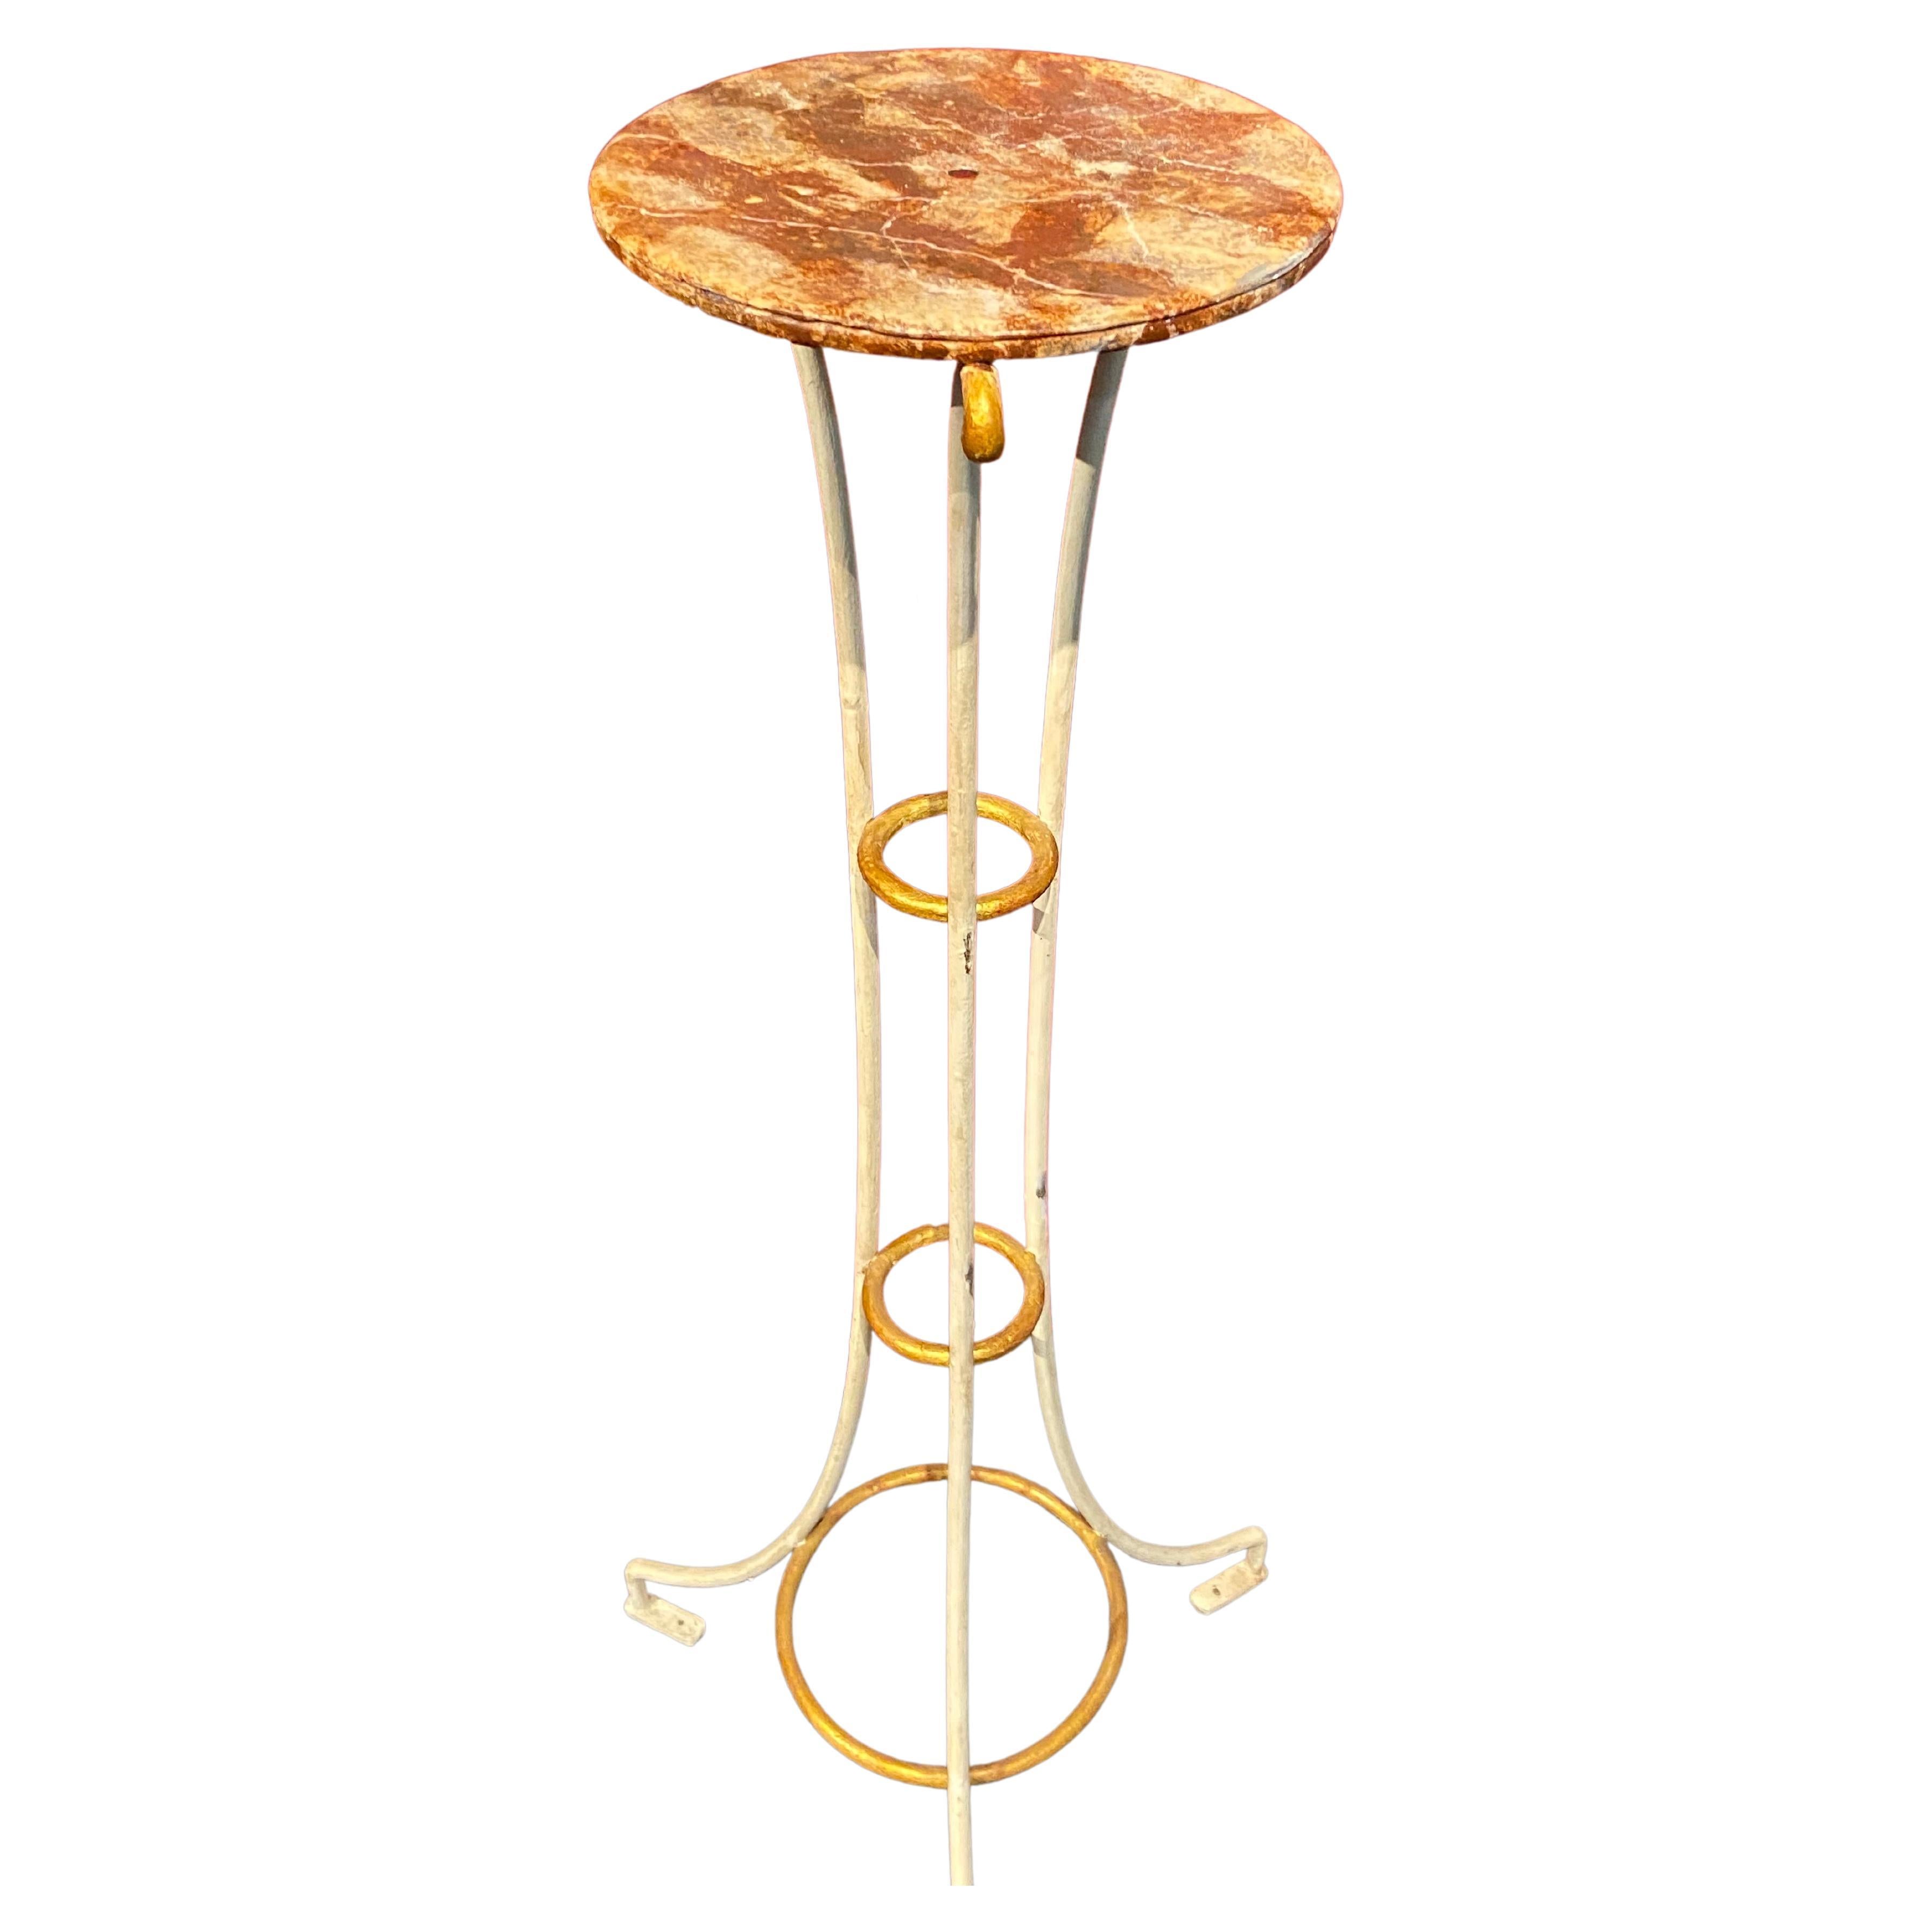 Antique French Hand Painted in Cream Tall Metal Table Jardiniere For Sale